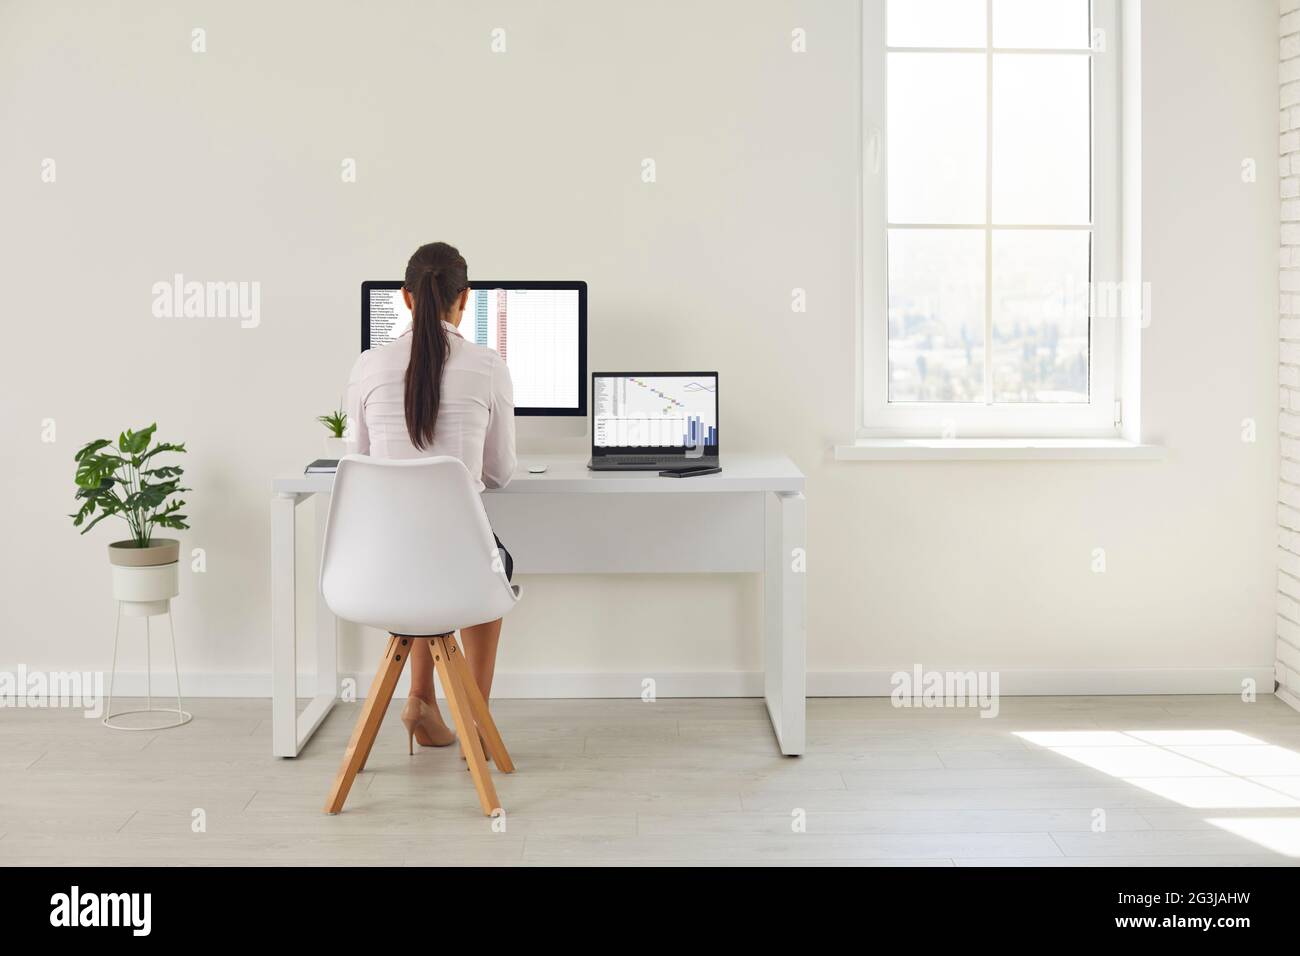 Back view of focused girl sitting at home office desk working at